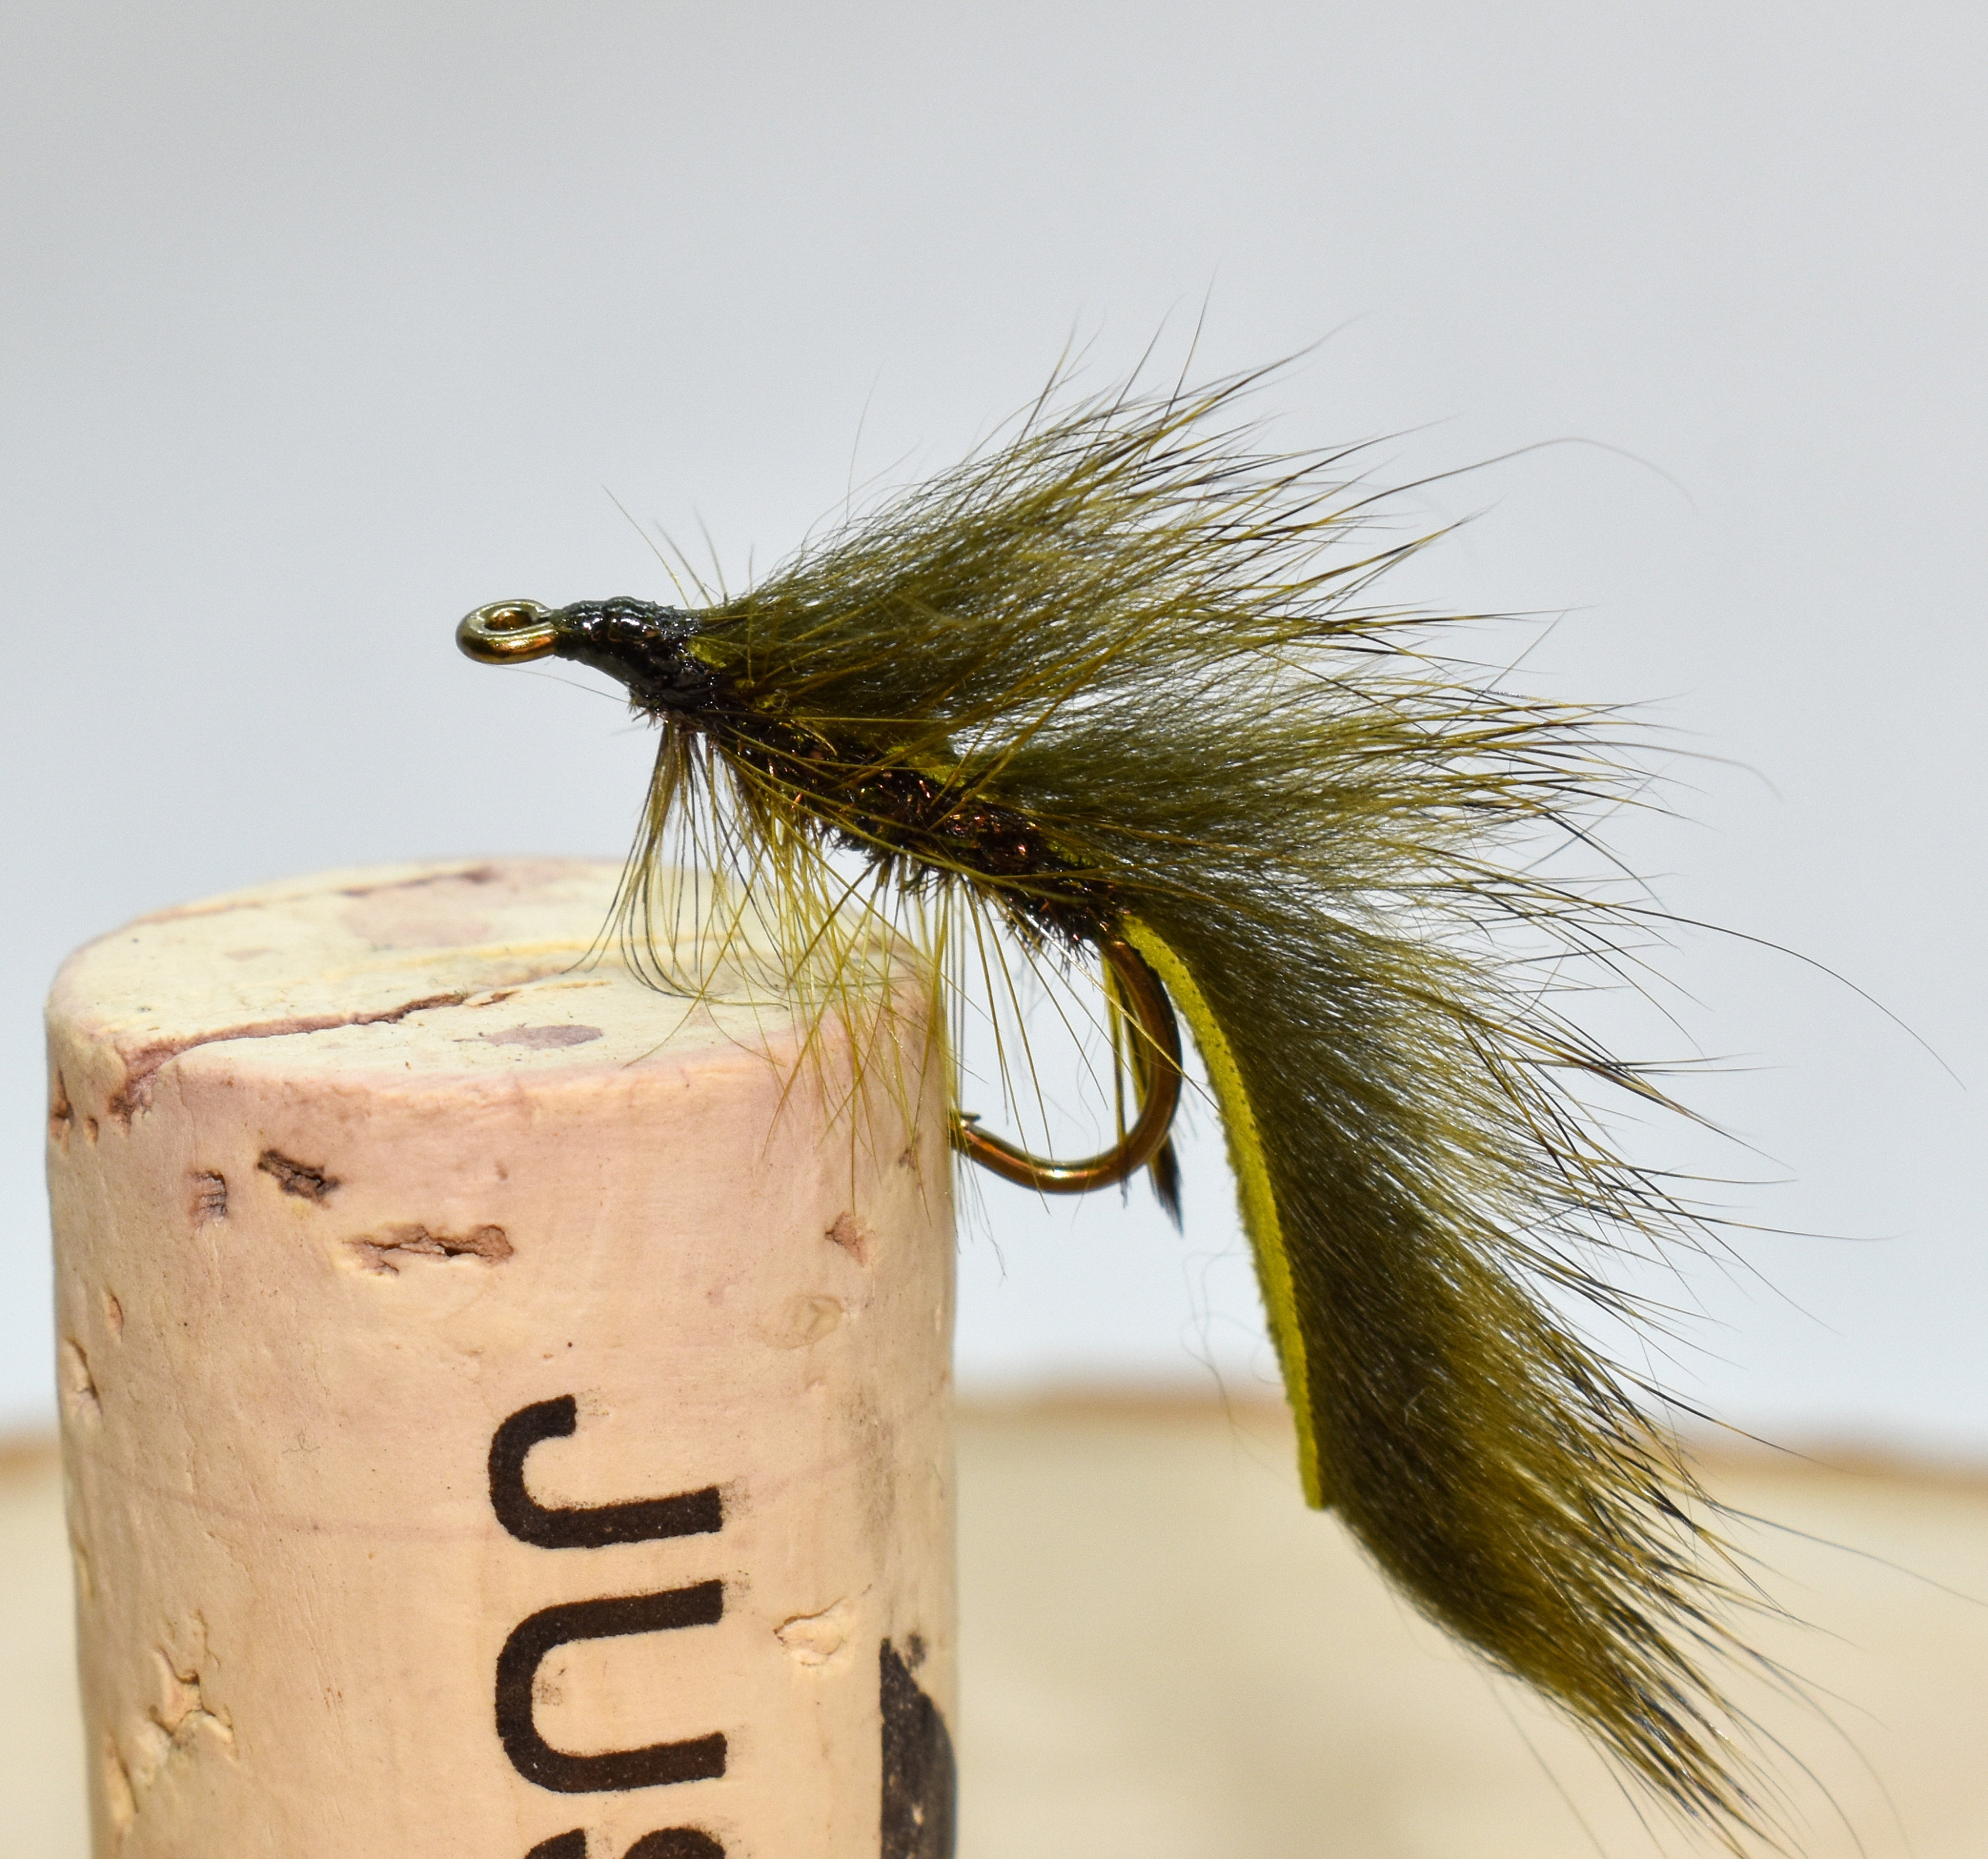 3 Fly Fishing Streamer Fly Assortment Squirrel and Herl Bugger Recommended  for Flyfishing Trout, Bass, Bluegill in Rivers, Lakes, and Ponds. -   Canada